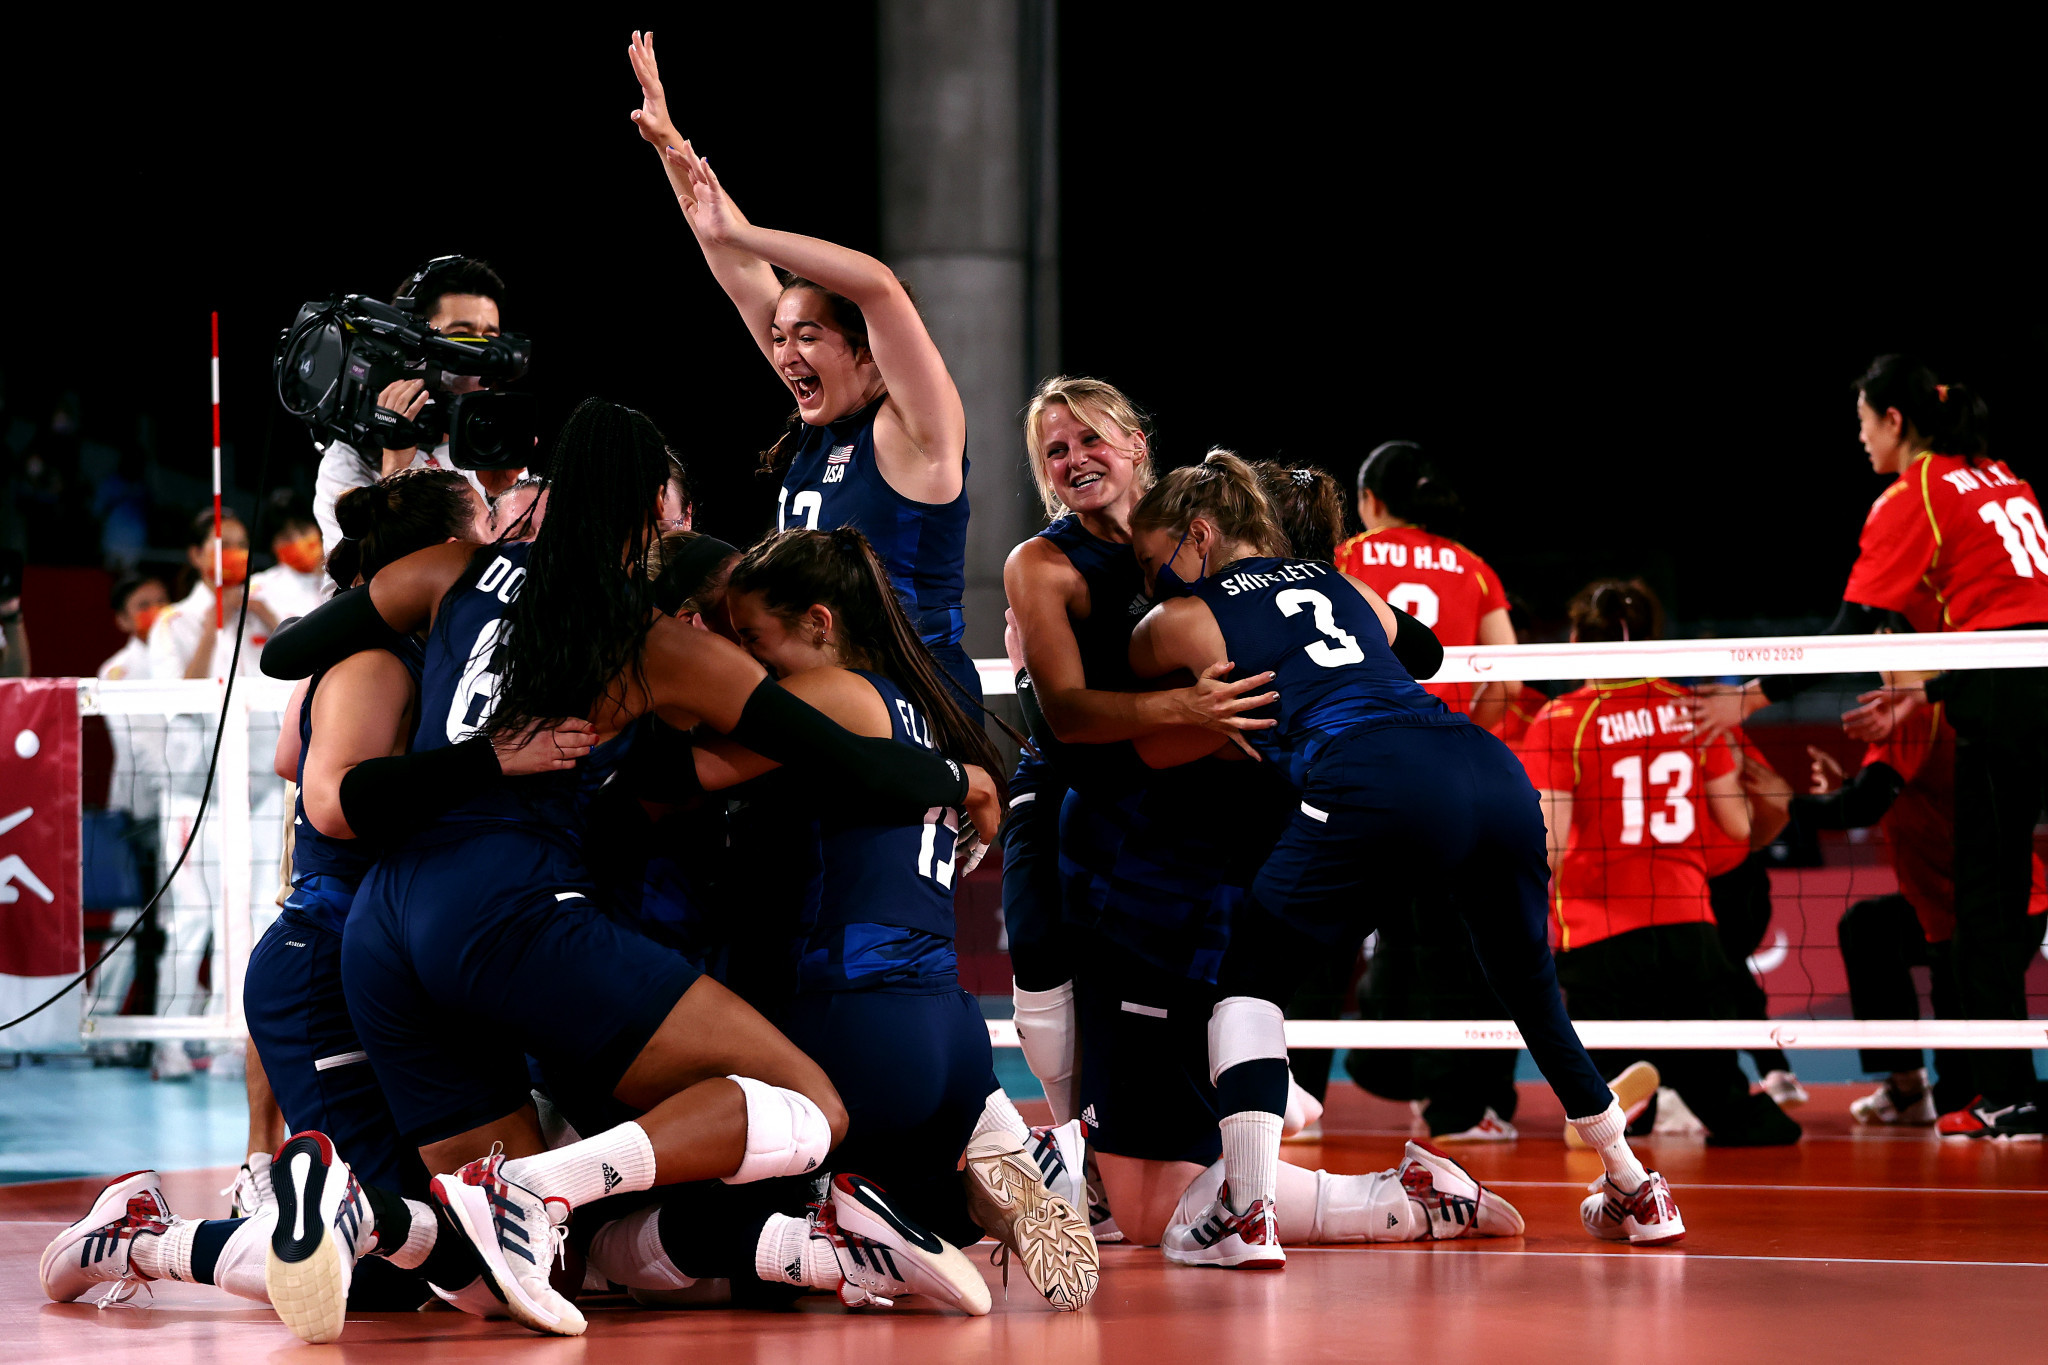 World ParaVolley is looking at marketing and management opportunities before the Los Angeles 2028 Paralympics ©Getty Images